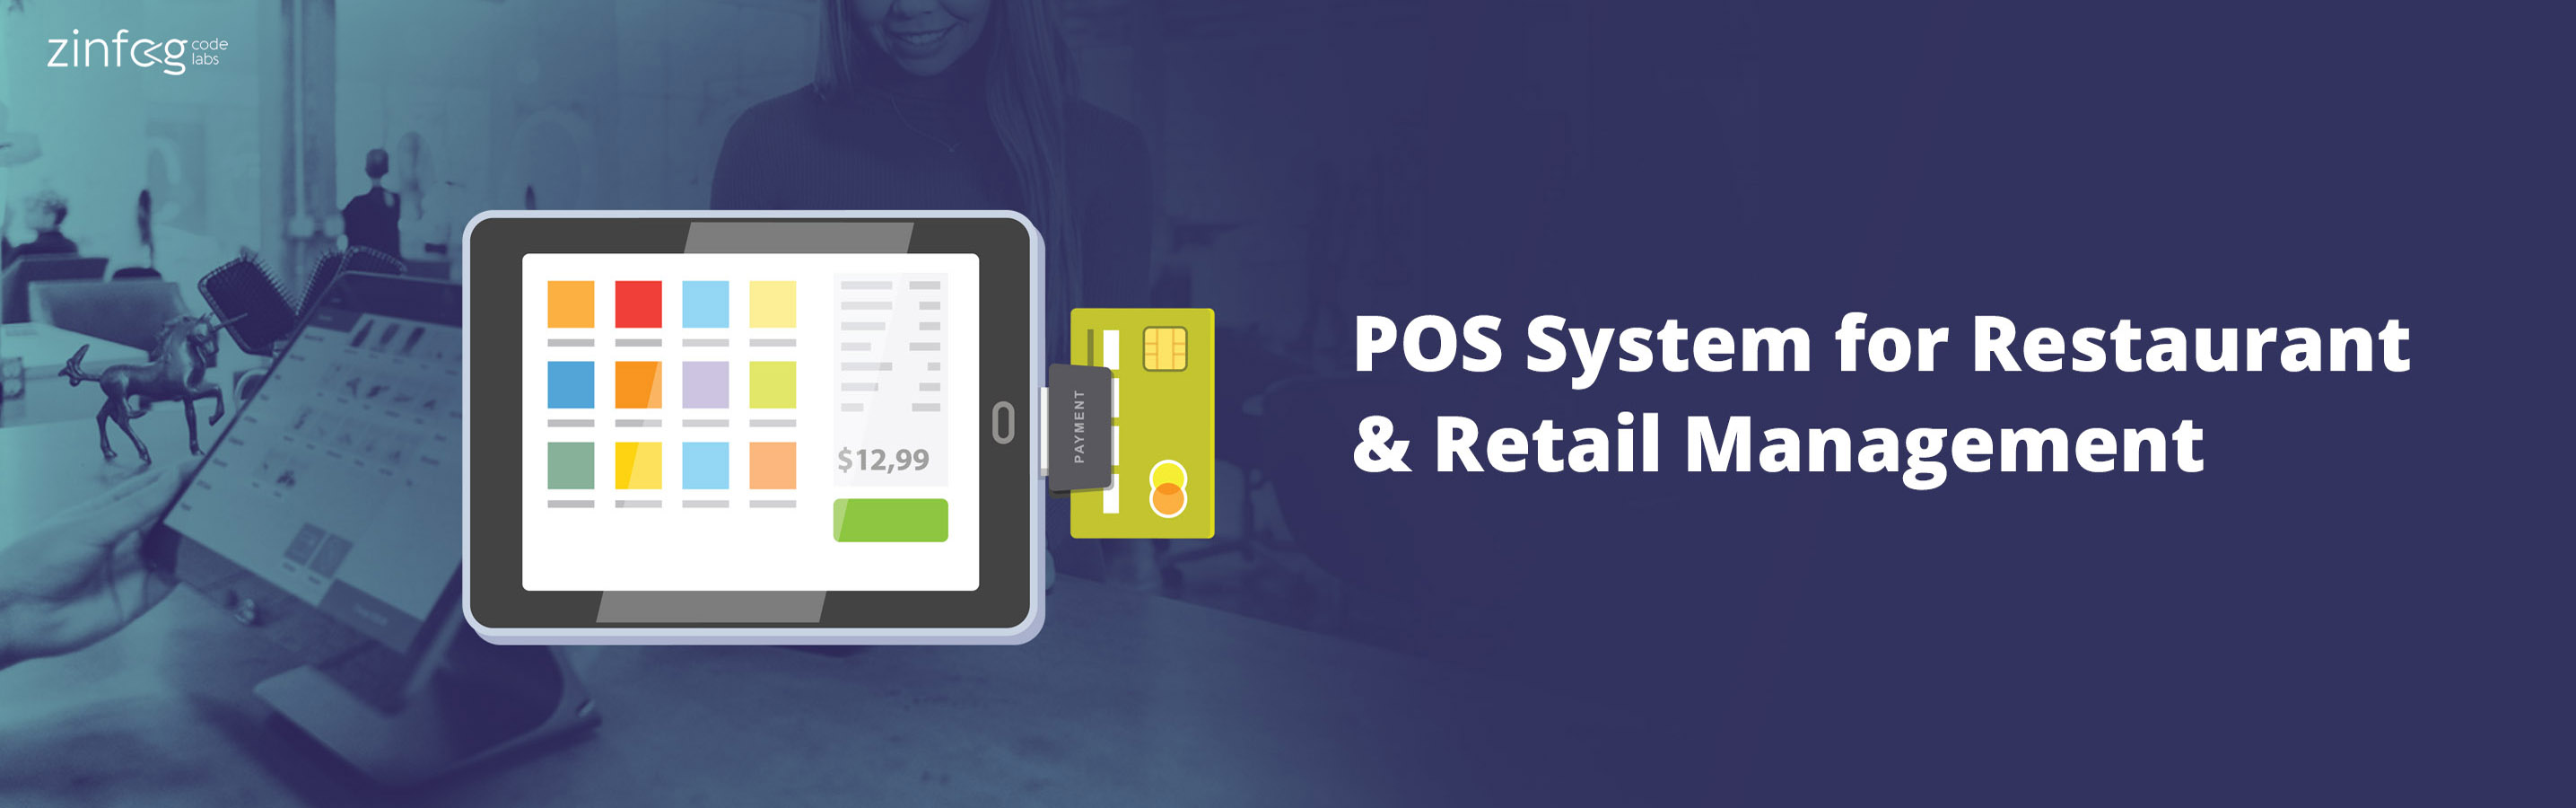 pos_system_for_restaurant_and_retail_management.html